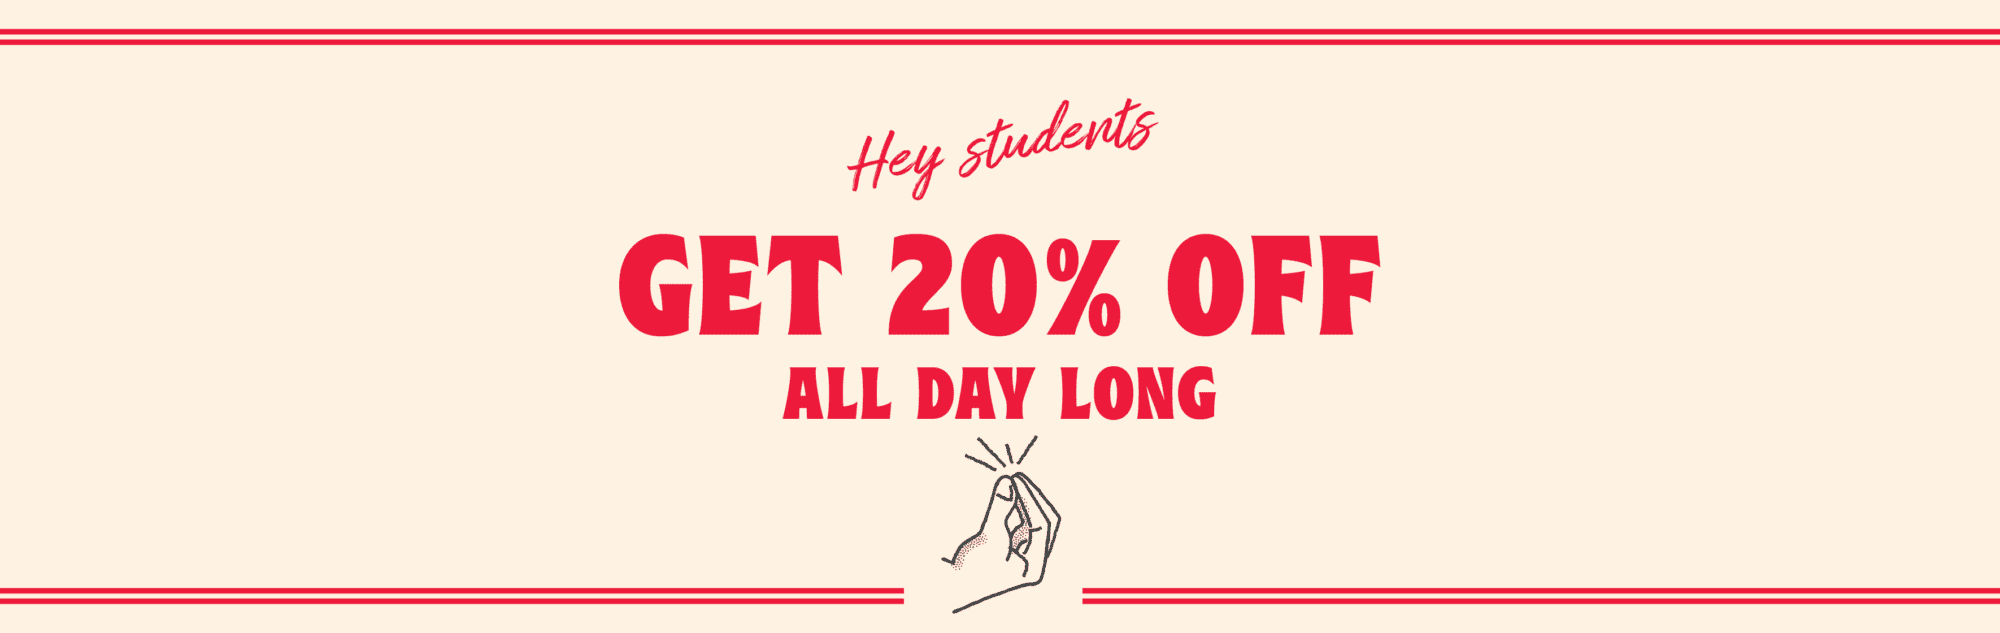 Hey students, get 20% off all day long